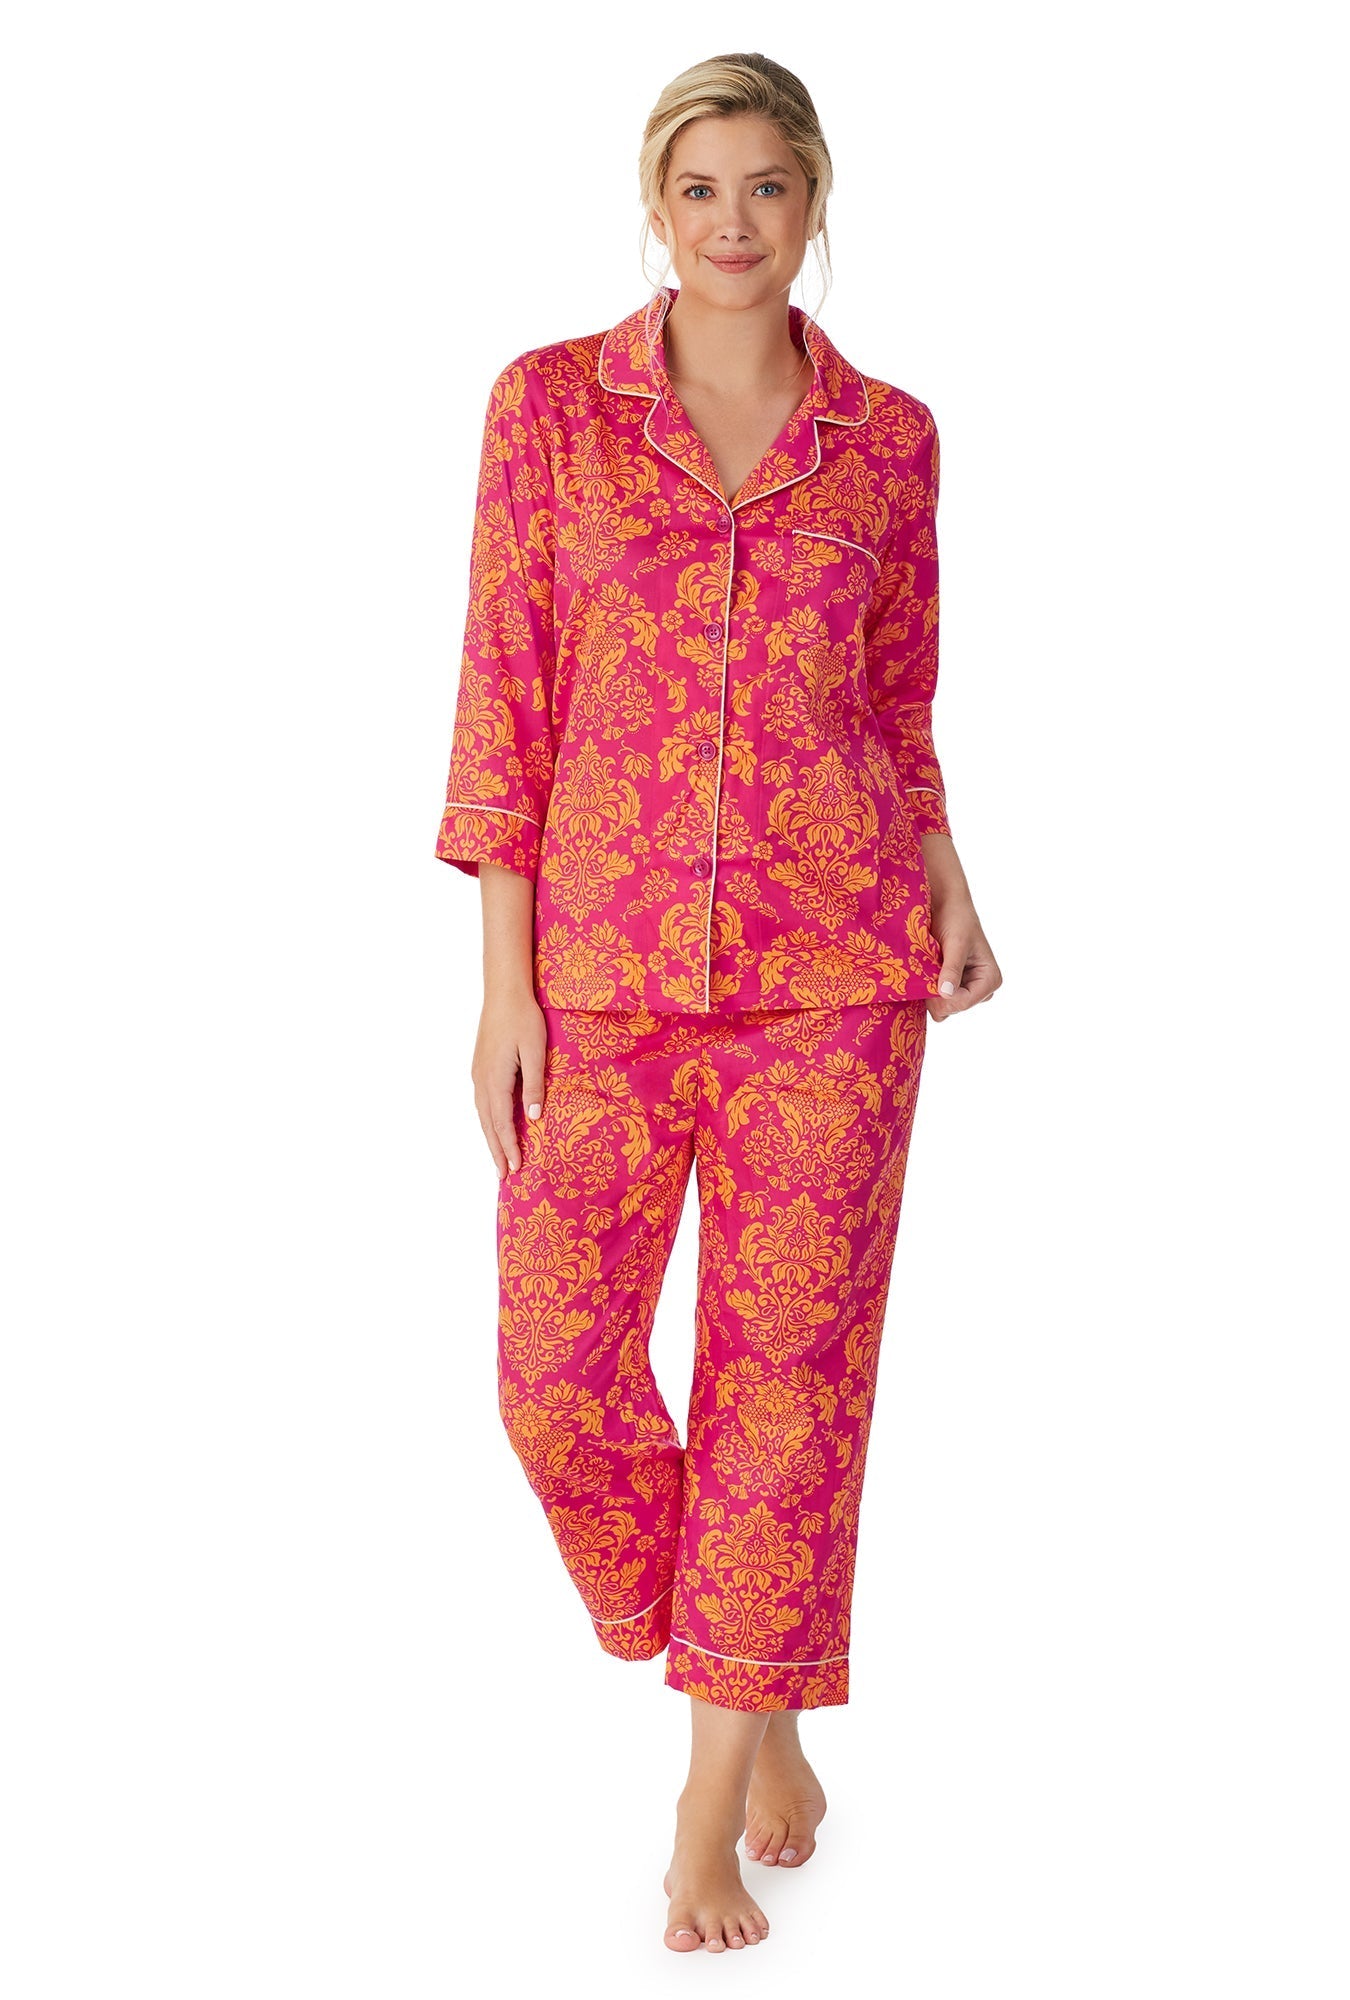 A lady wearing a pink quarter sleeve cropped pj set with orange floral pattern.